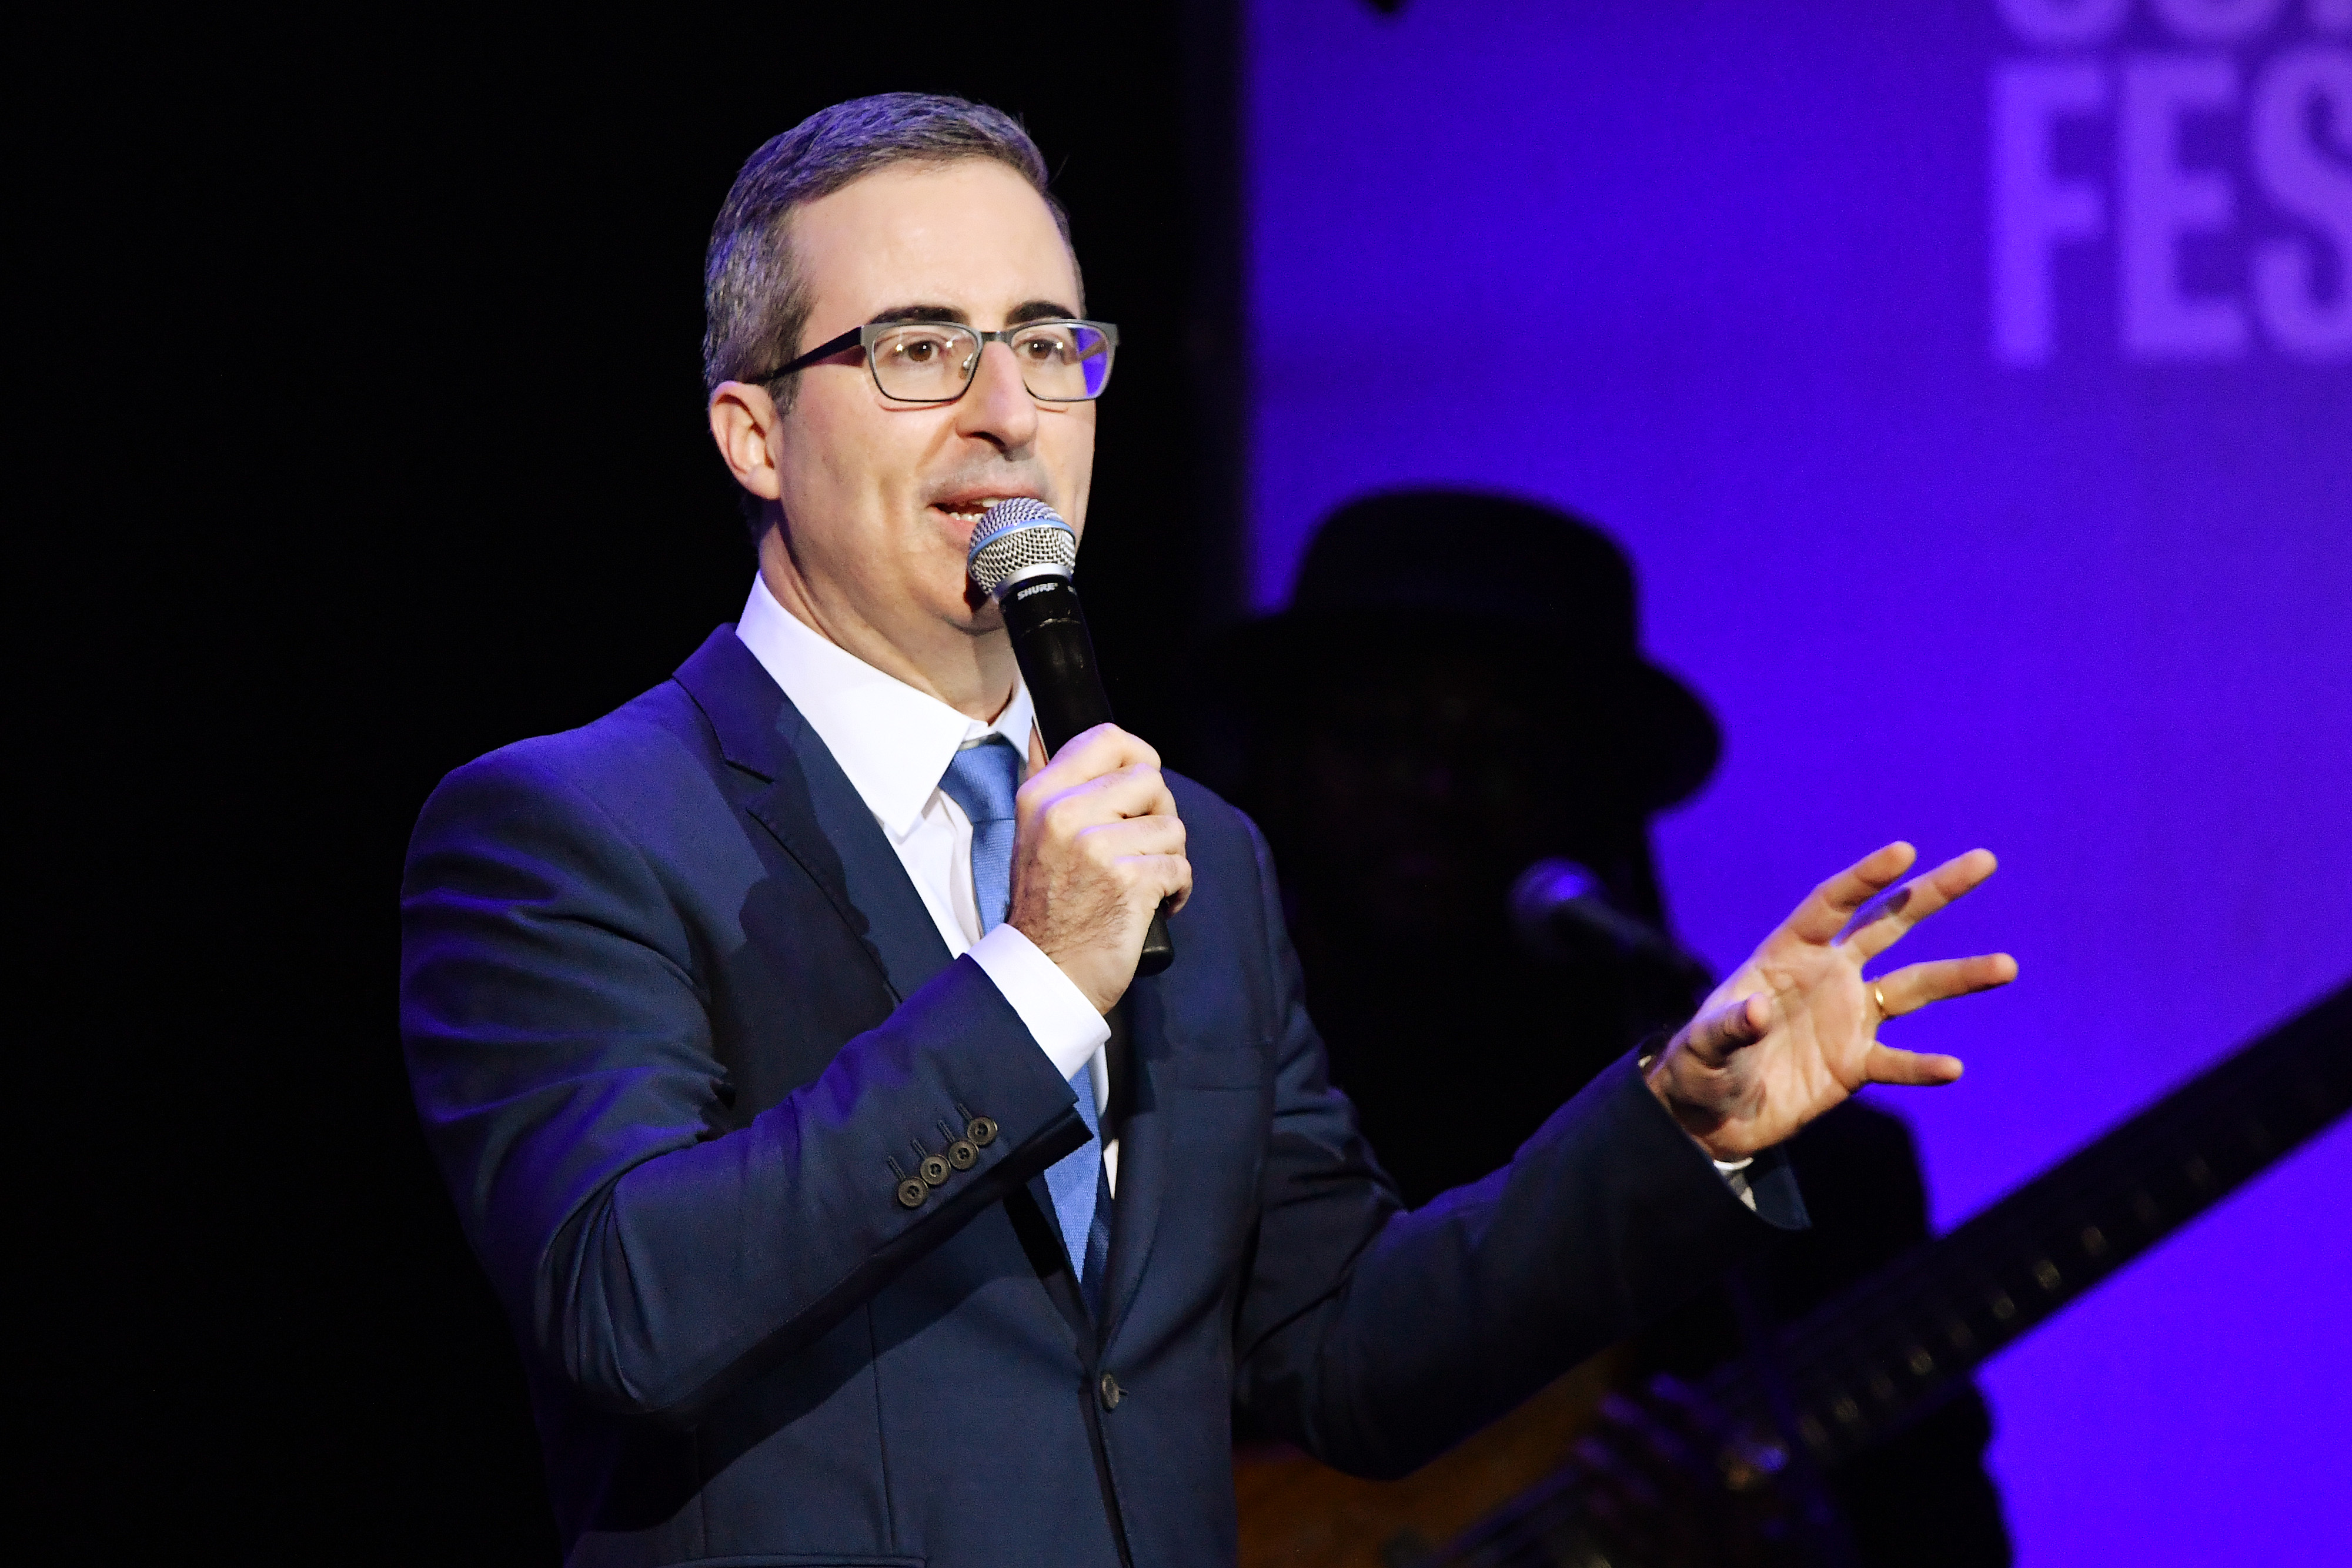 John Oliver performs onstage during the 13th annual Stand Up for Heroes to benefit the Bob Woodruff Foundation